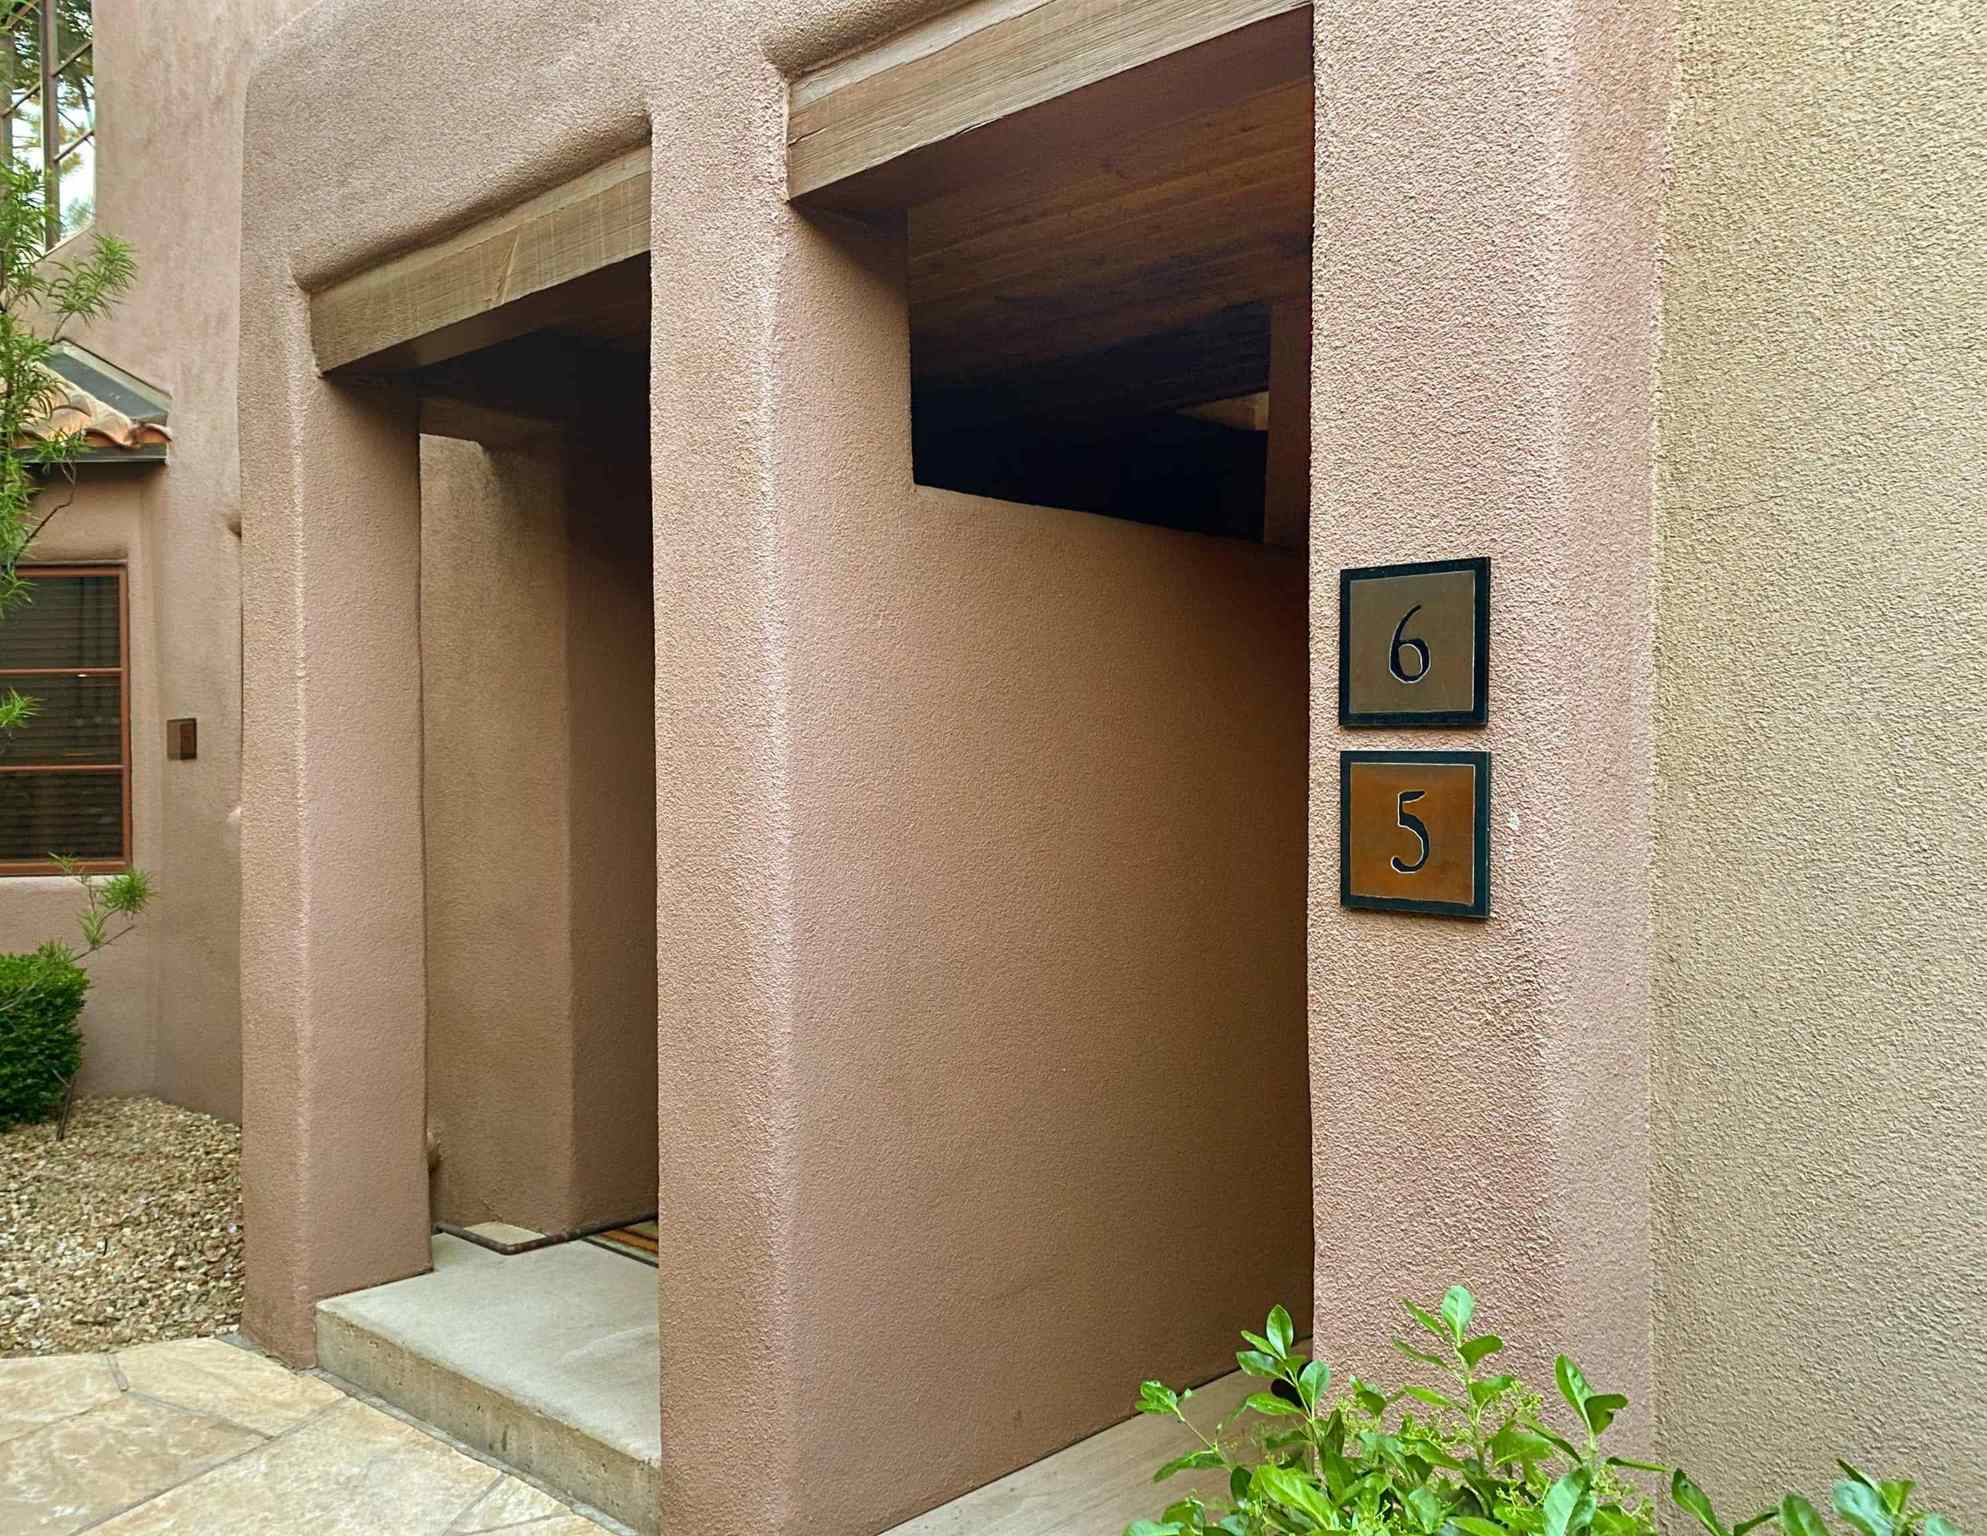 103 CATRON #6, Santa Fe, New Mexico 87501, 1 Bedroom Bedrooms, ,1 BathroomBathrooms,Residential,For Sale,103 CATRON #6,202202043